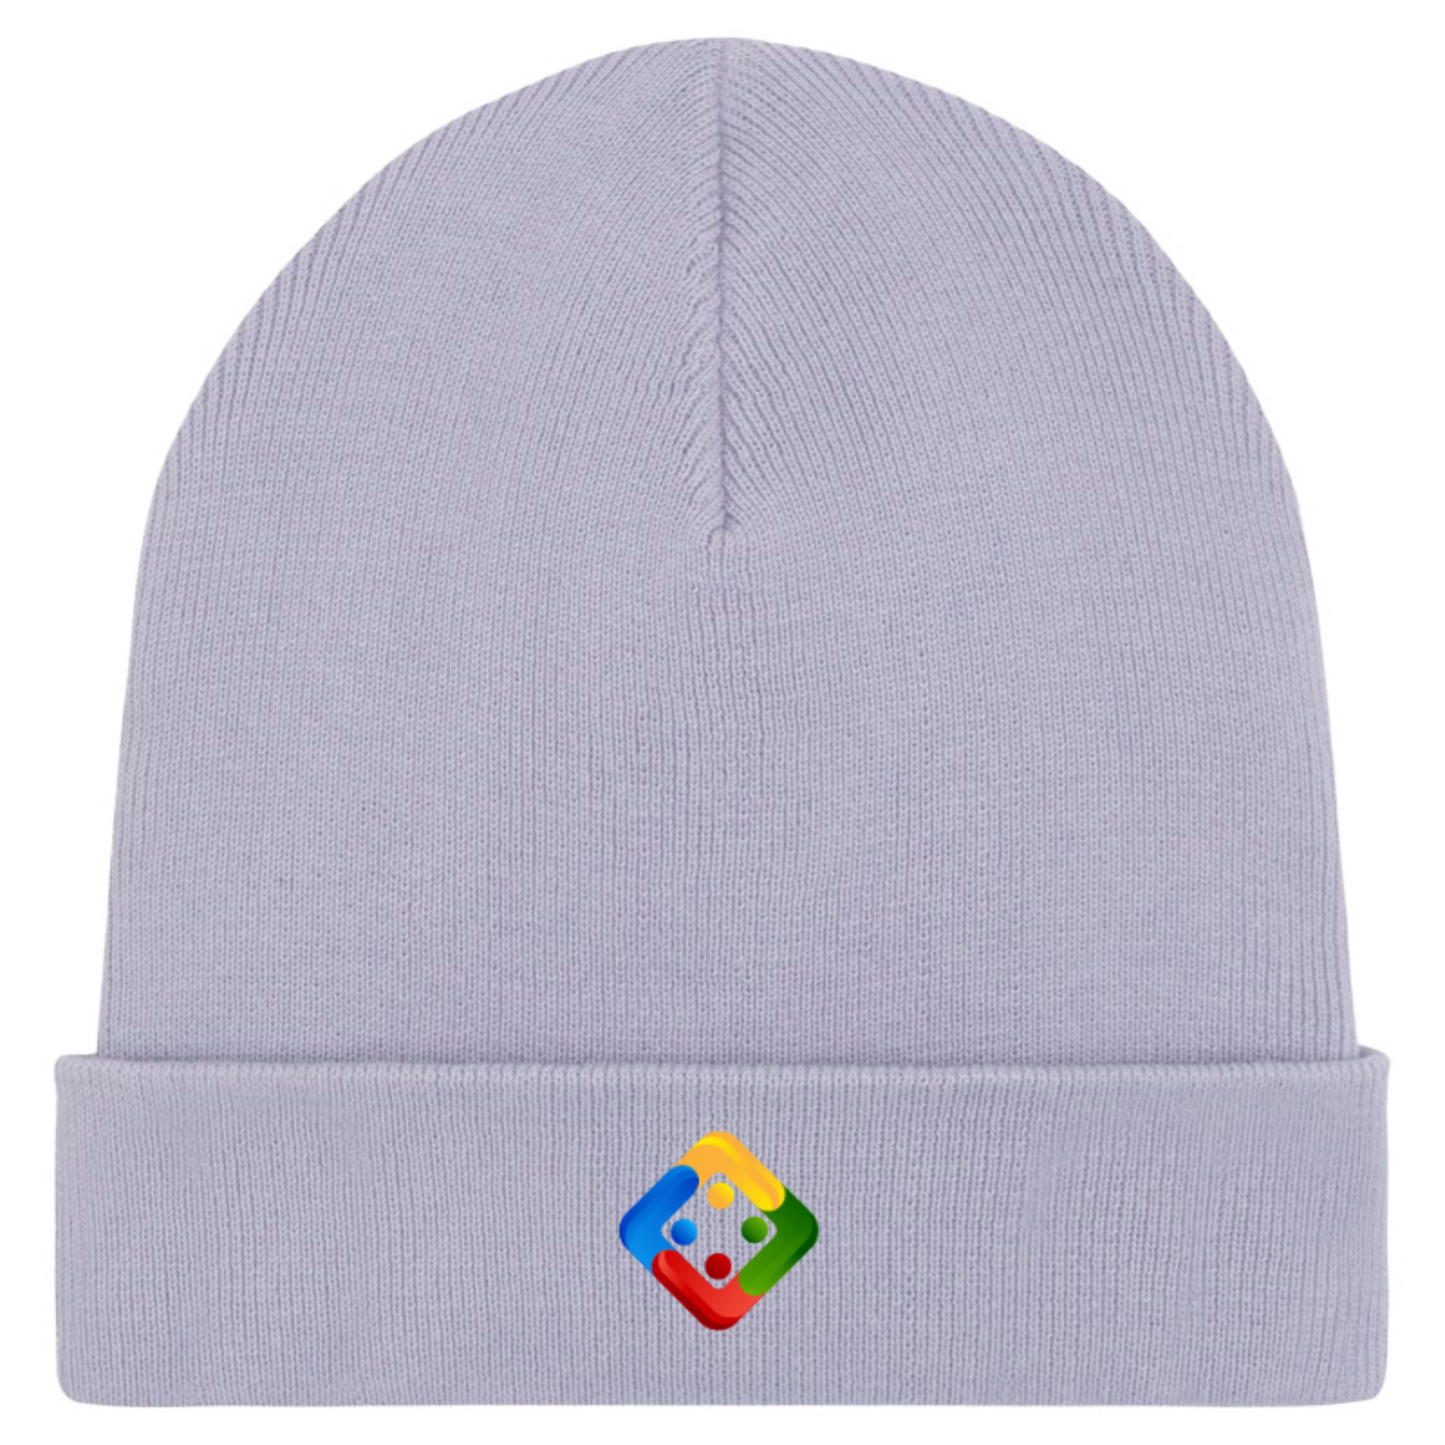 Unisex Ribbed Beanie with embroidered Uckers emblem. Available in 8 colours.